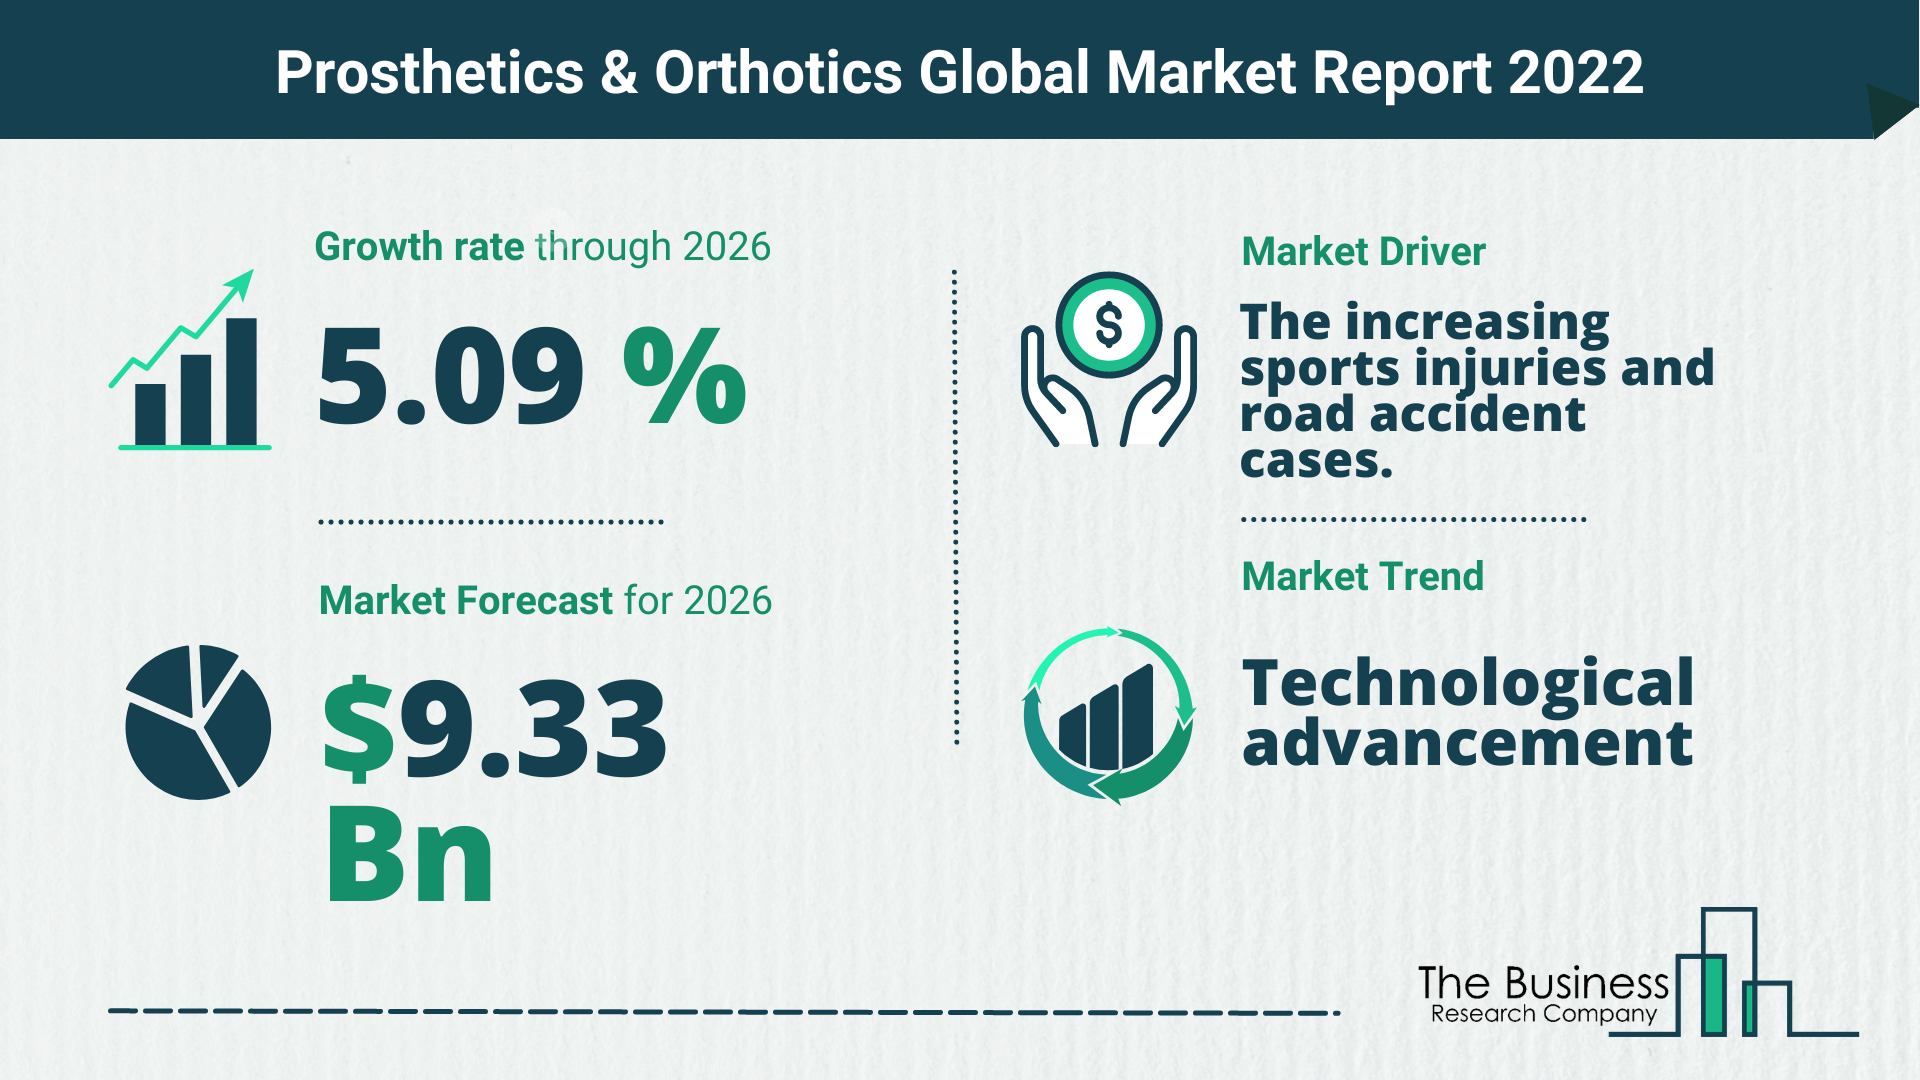 Latest Prosthetics & Orthotics Market Growth Study 2022-2026 By The Business Research Company